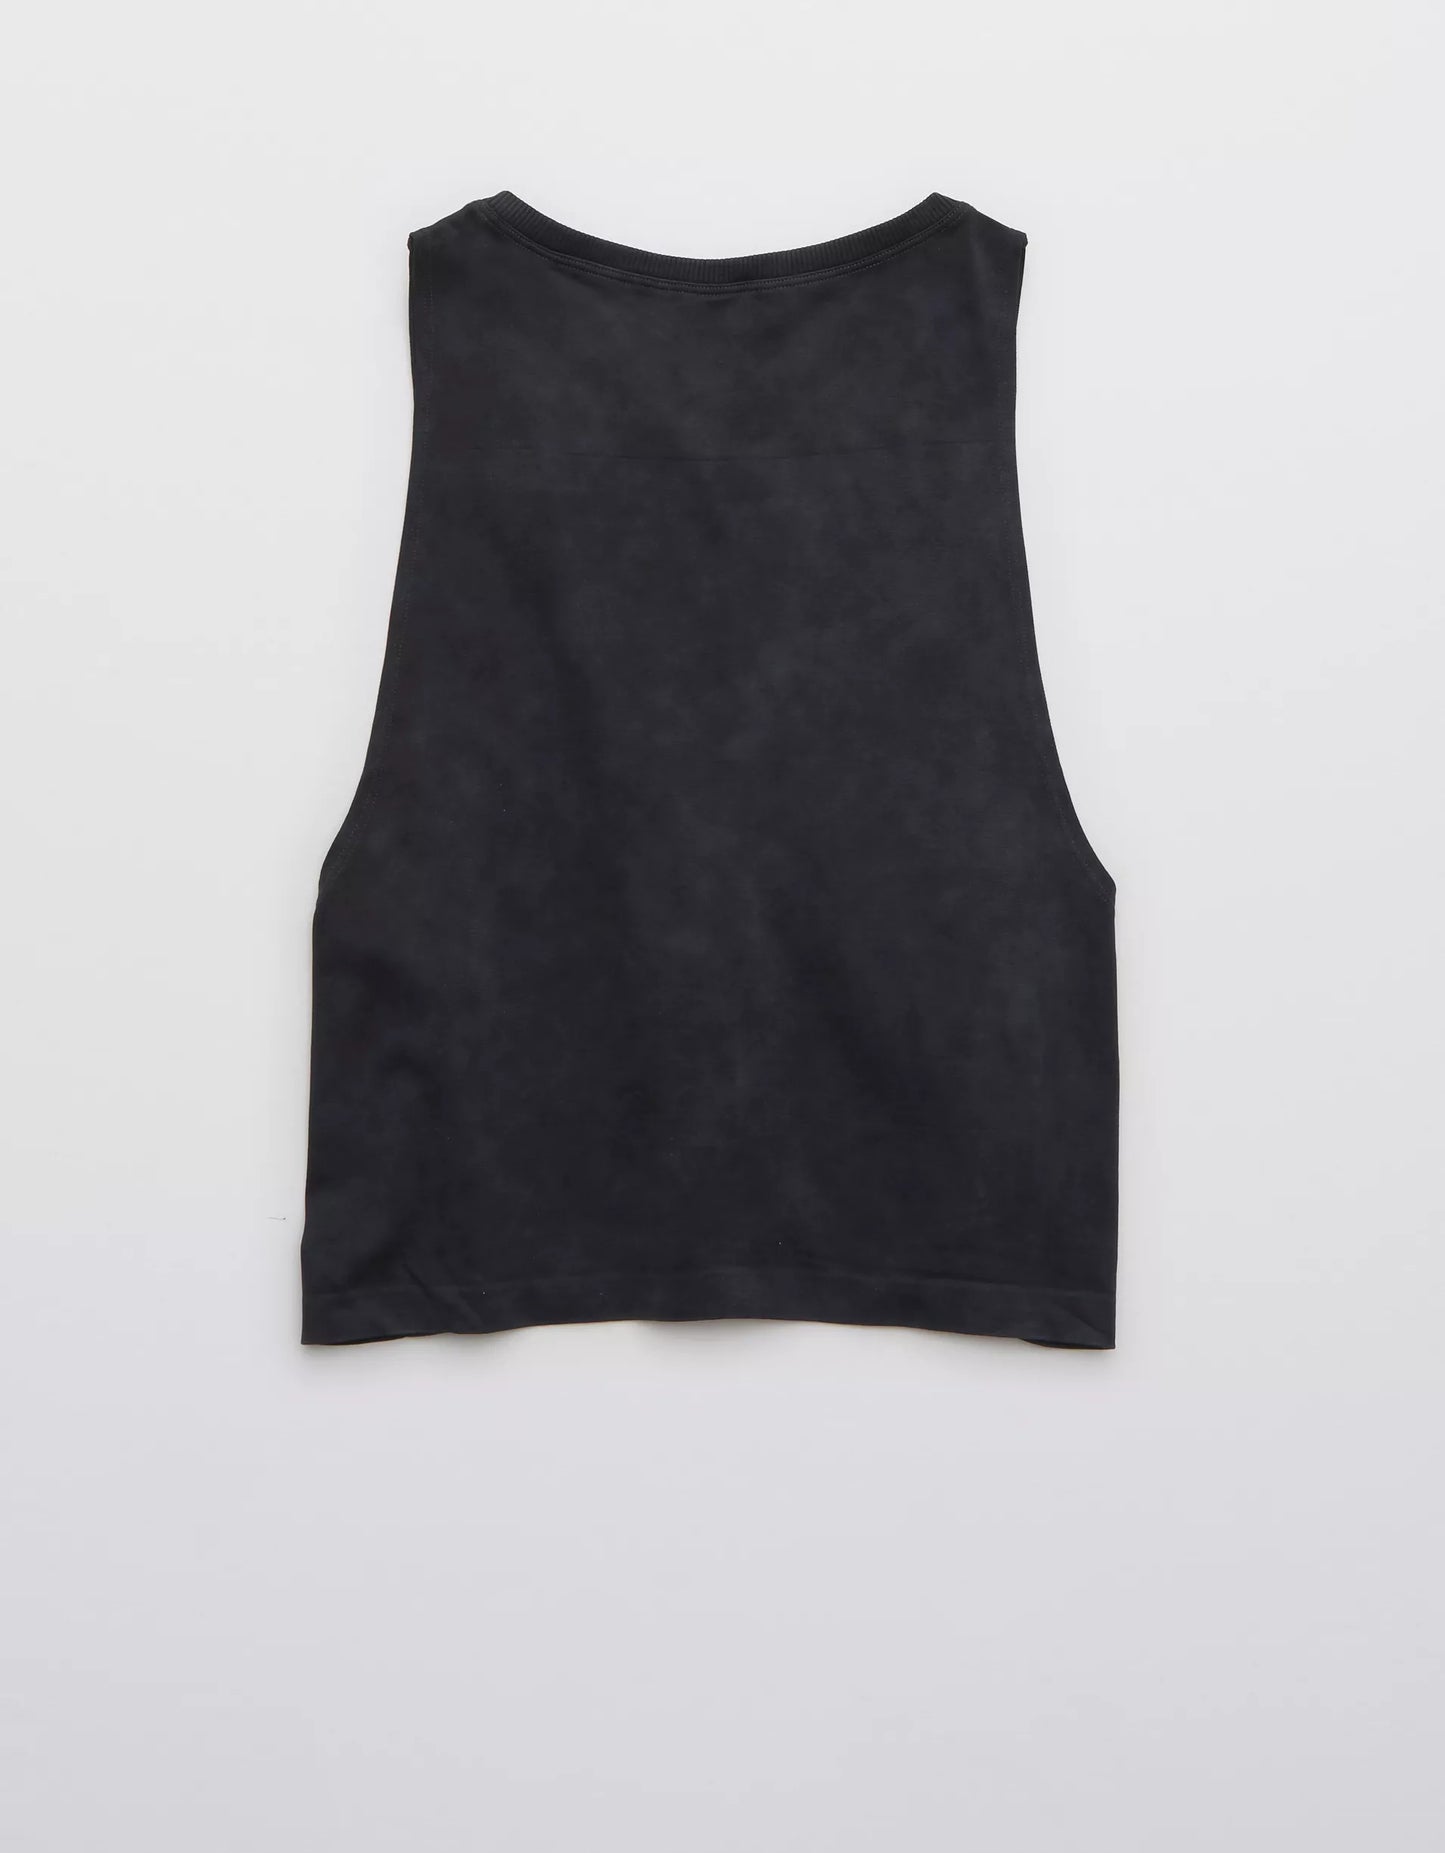 OFFLINE by Aerie Cropped Muscle Tank